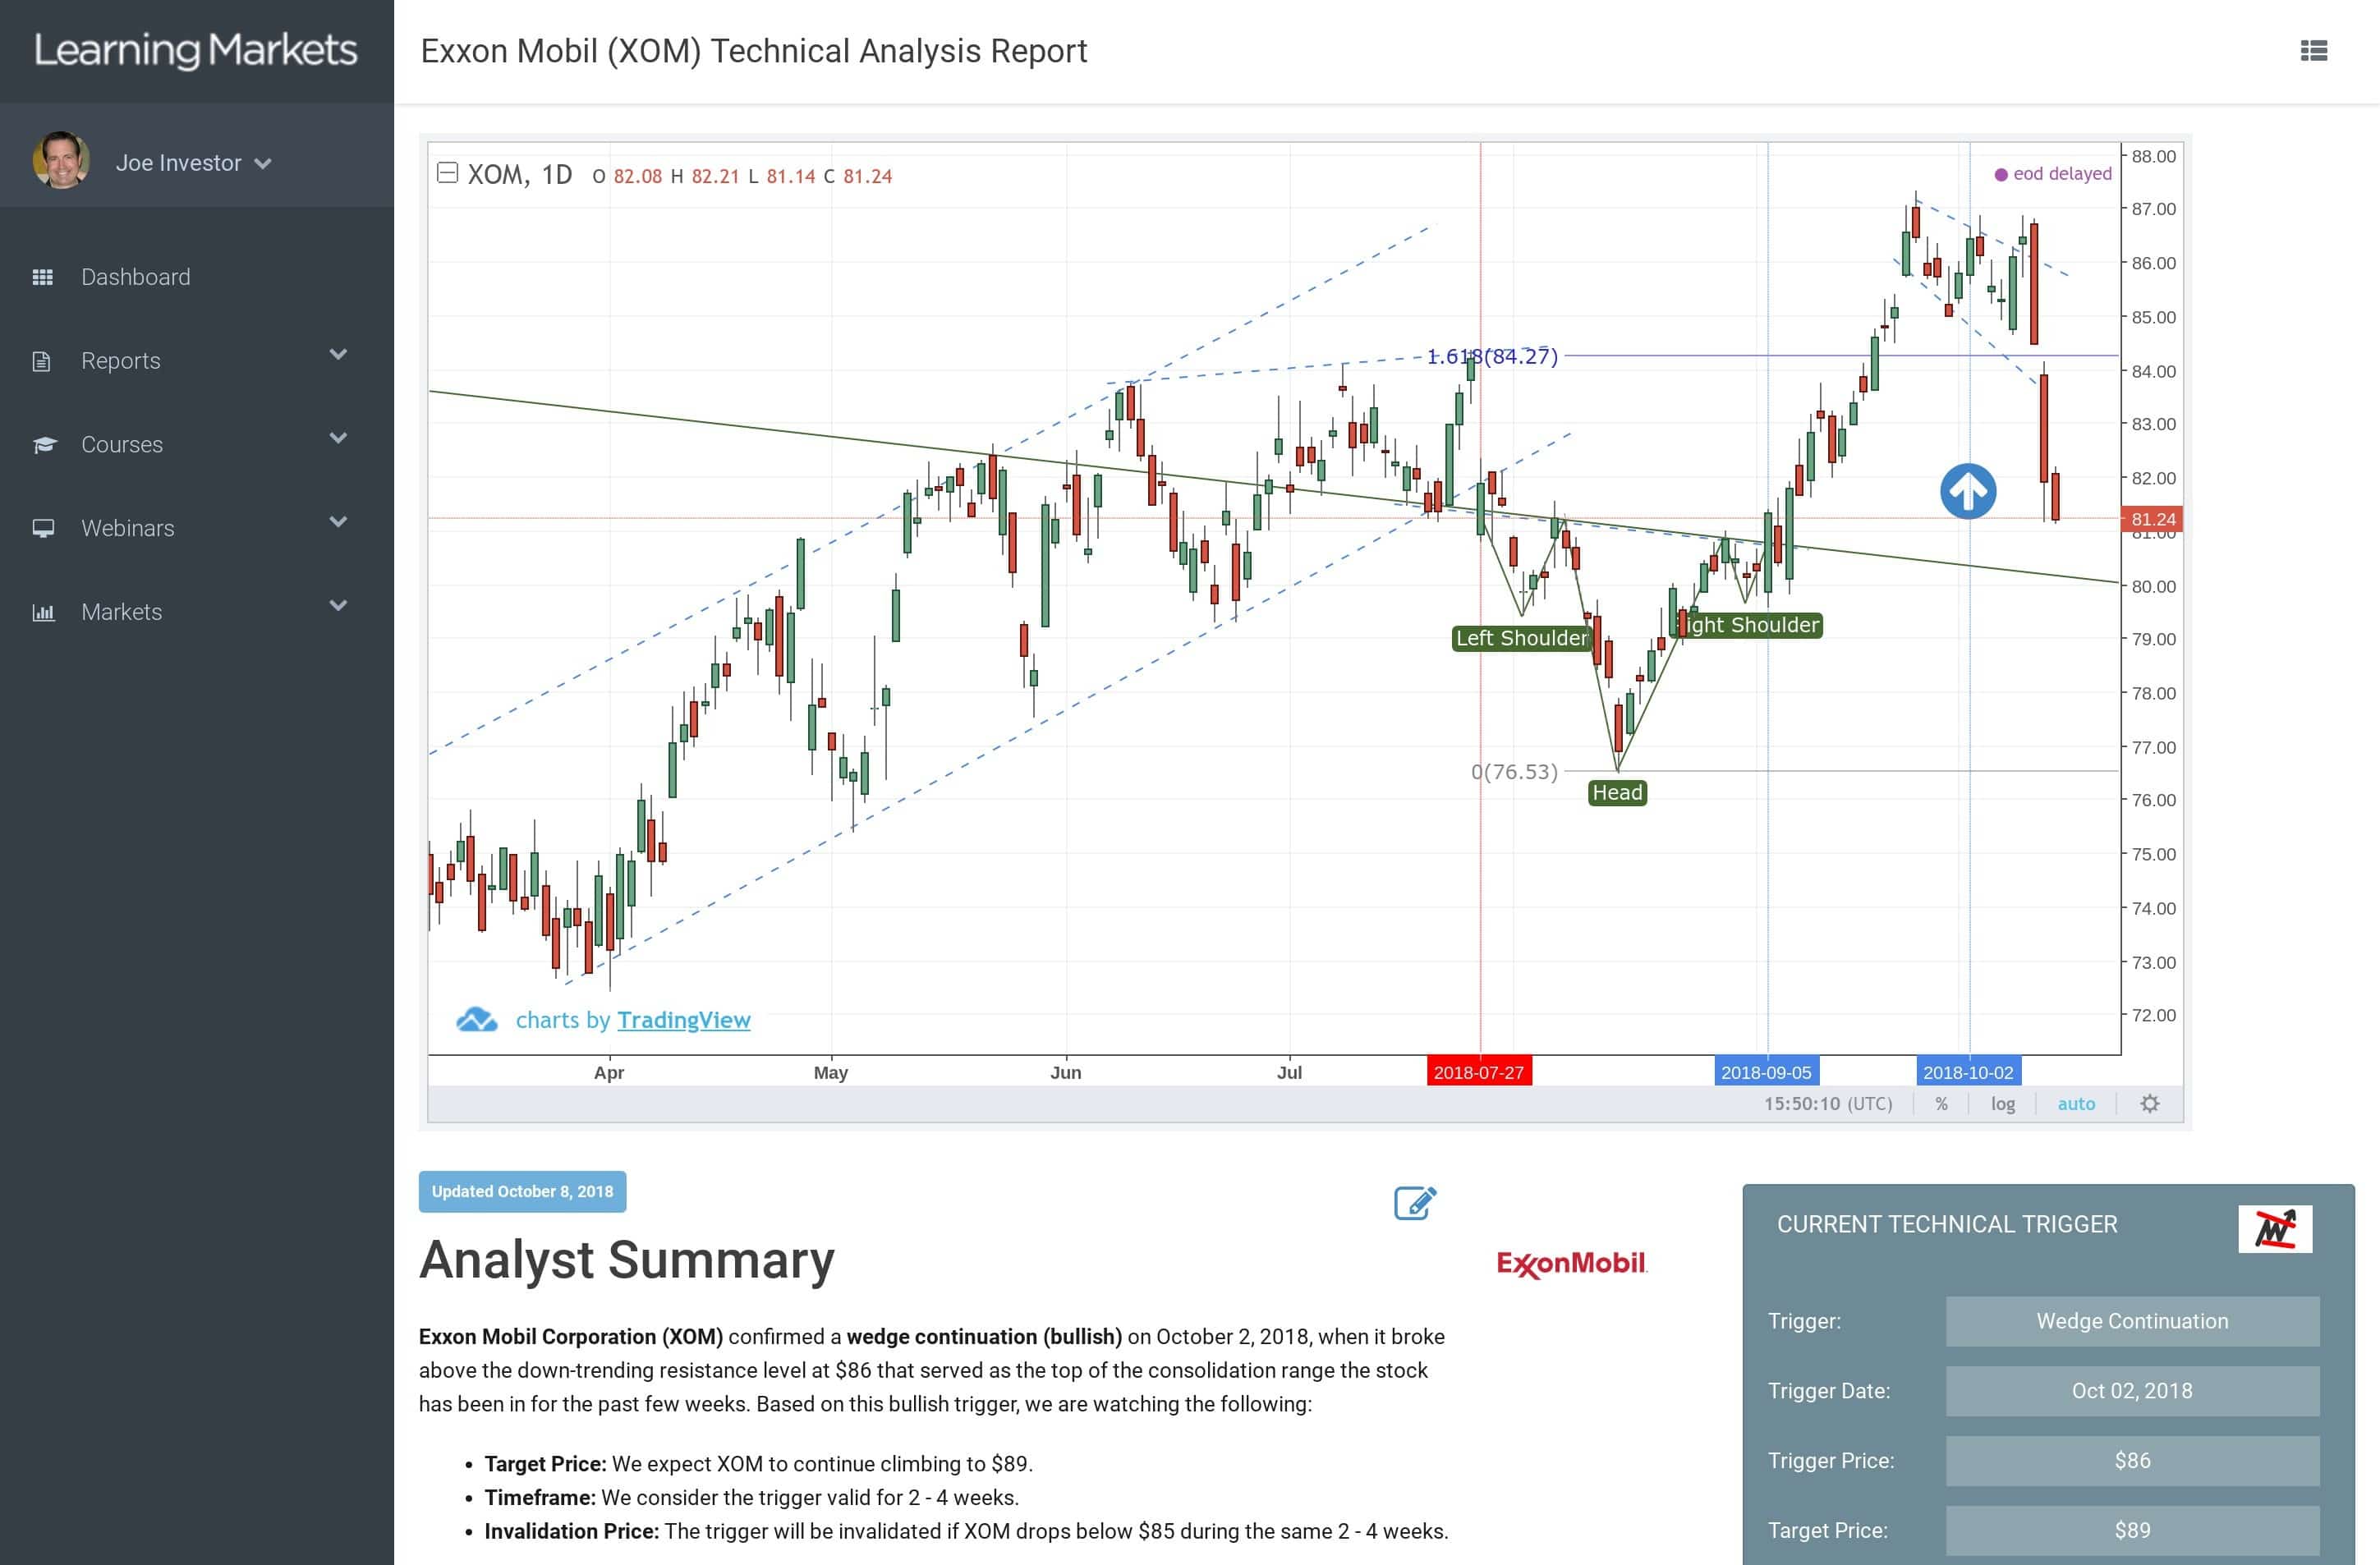 Technical Analysis Reports